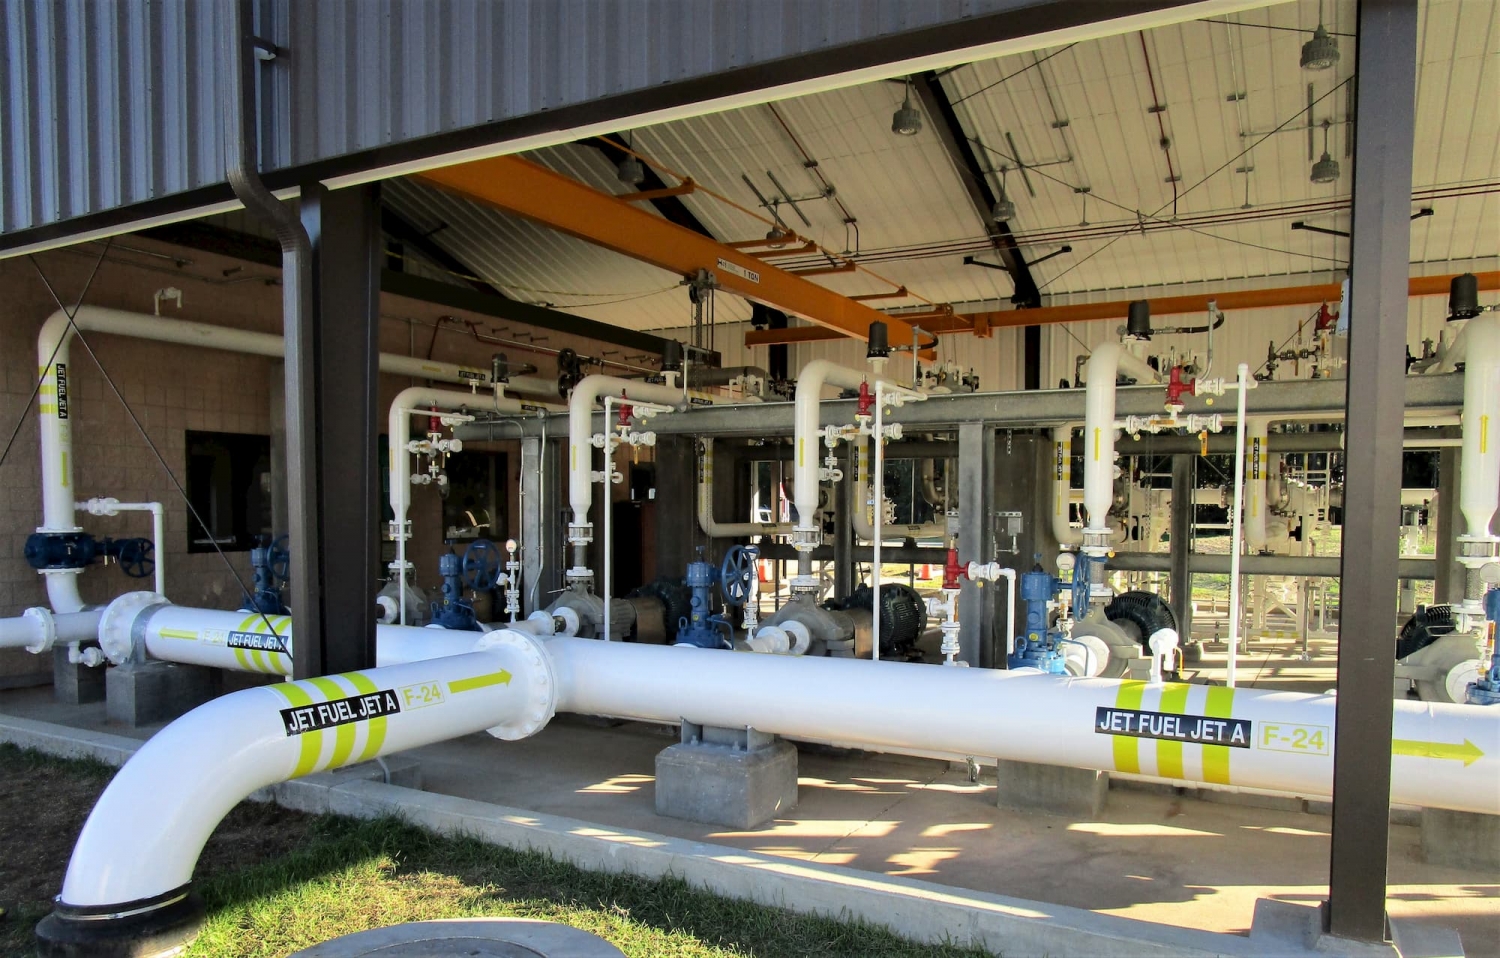 Fuel pipeline in a fuel pumphouse